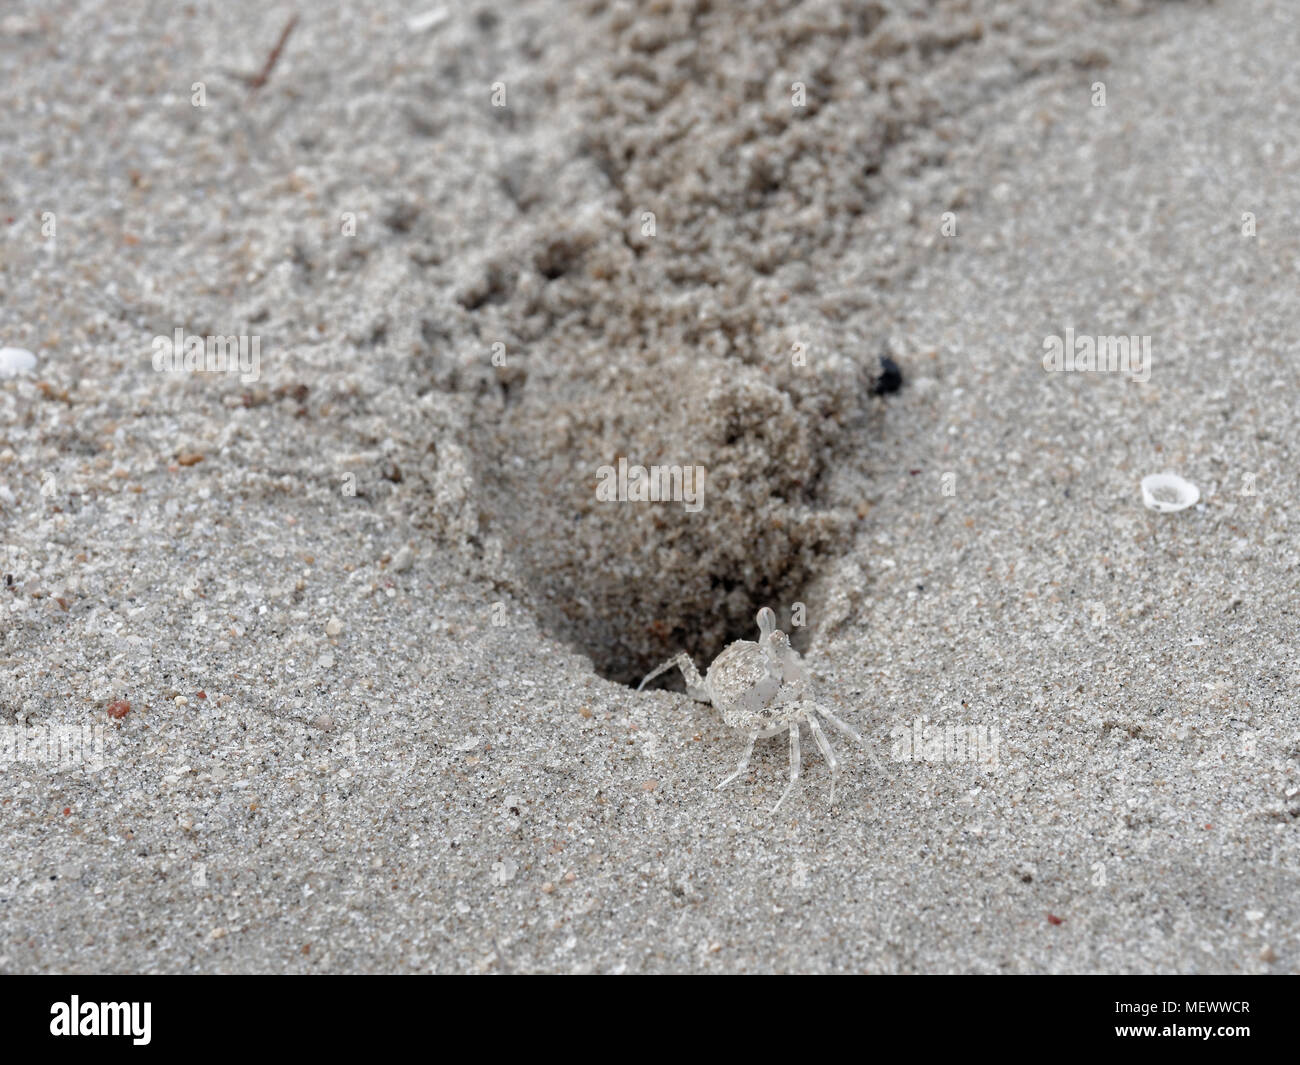 Transparent ghost or sand crab with pale color body is in front of its burrow or hole with sediment balls or pellets made by sand Stock Photo